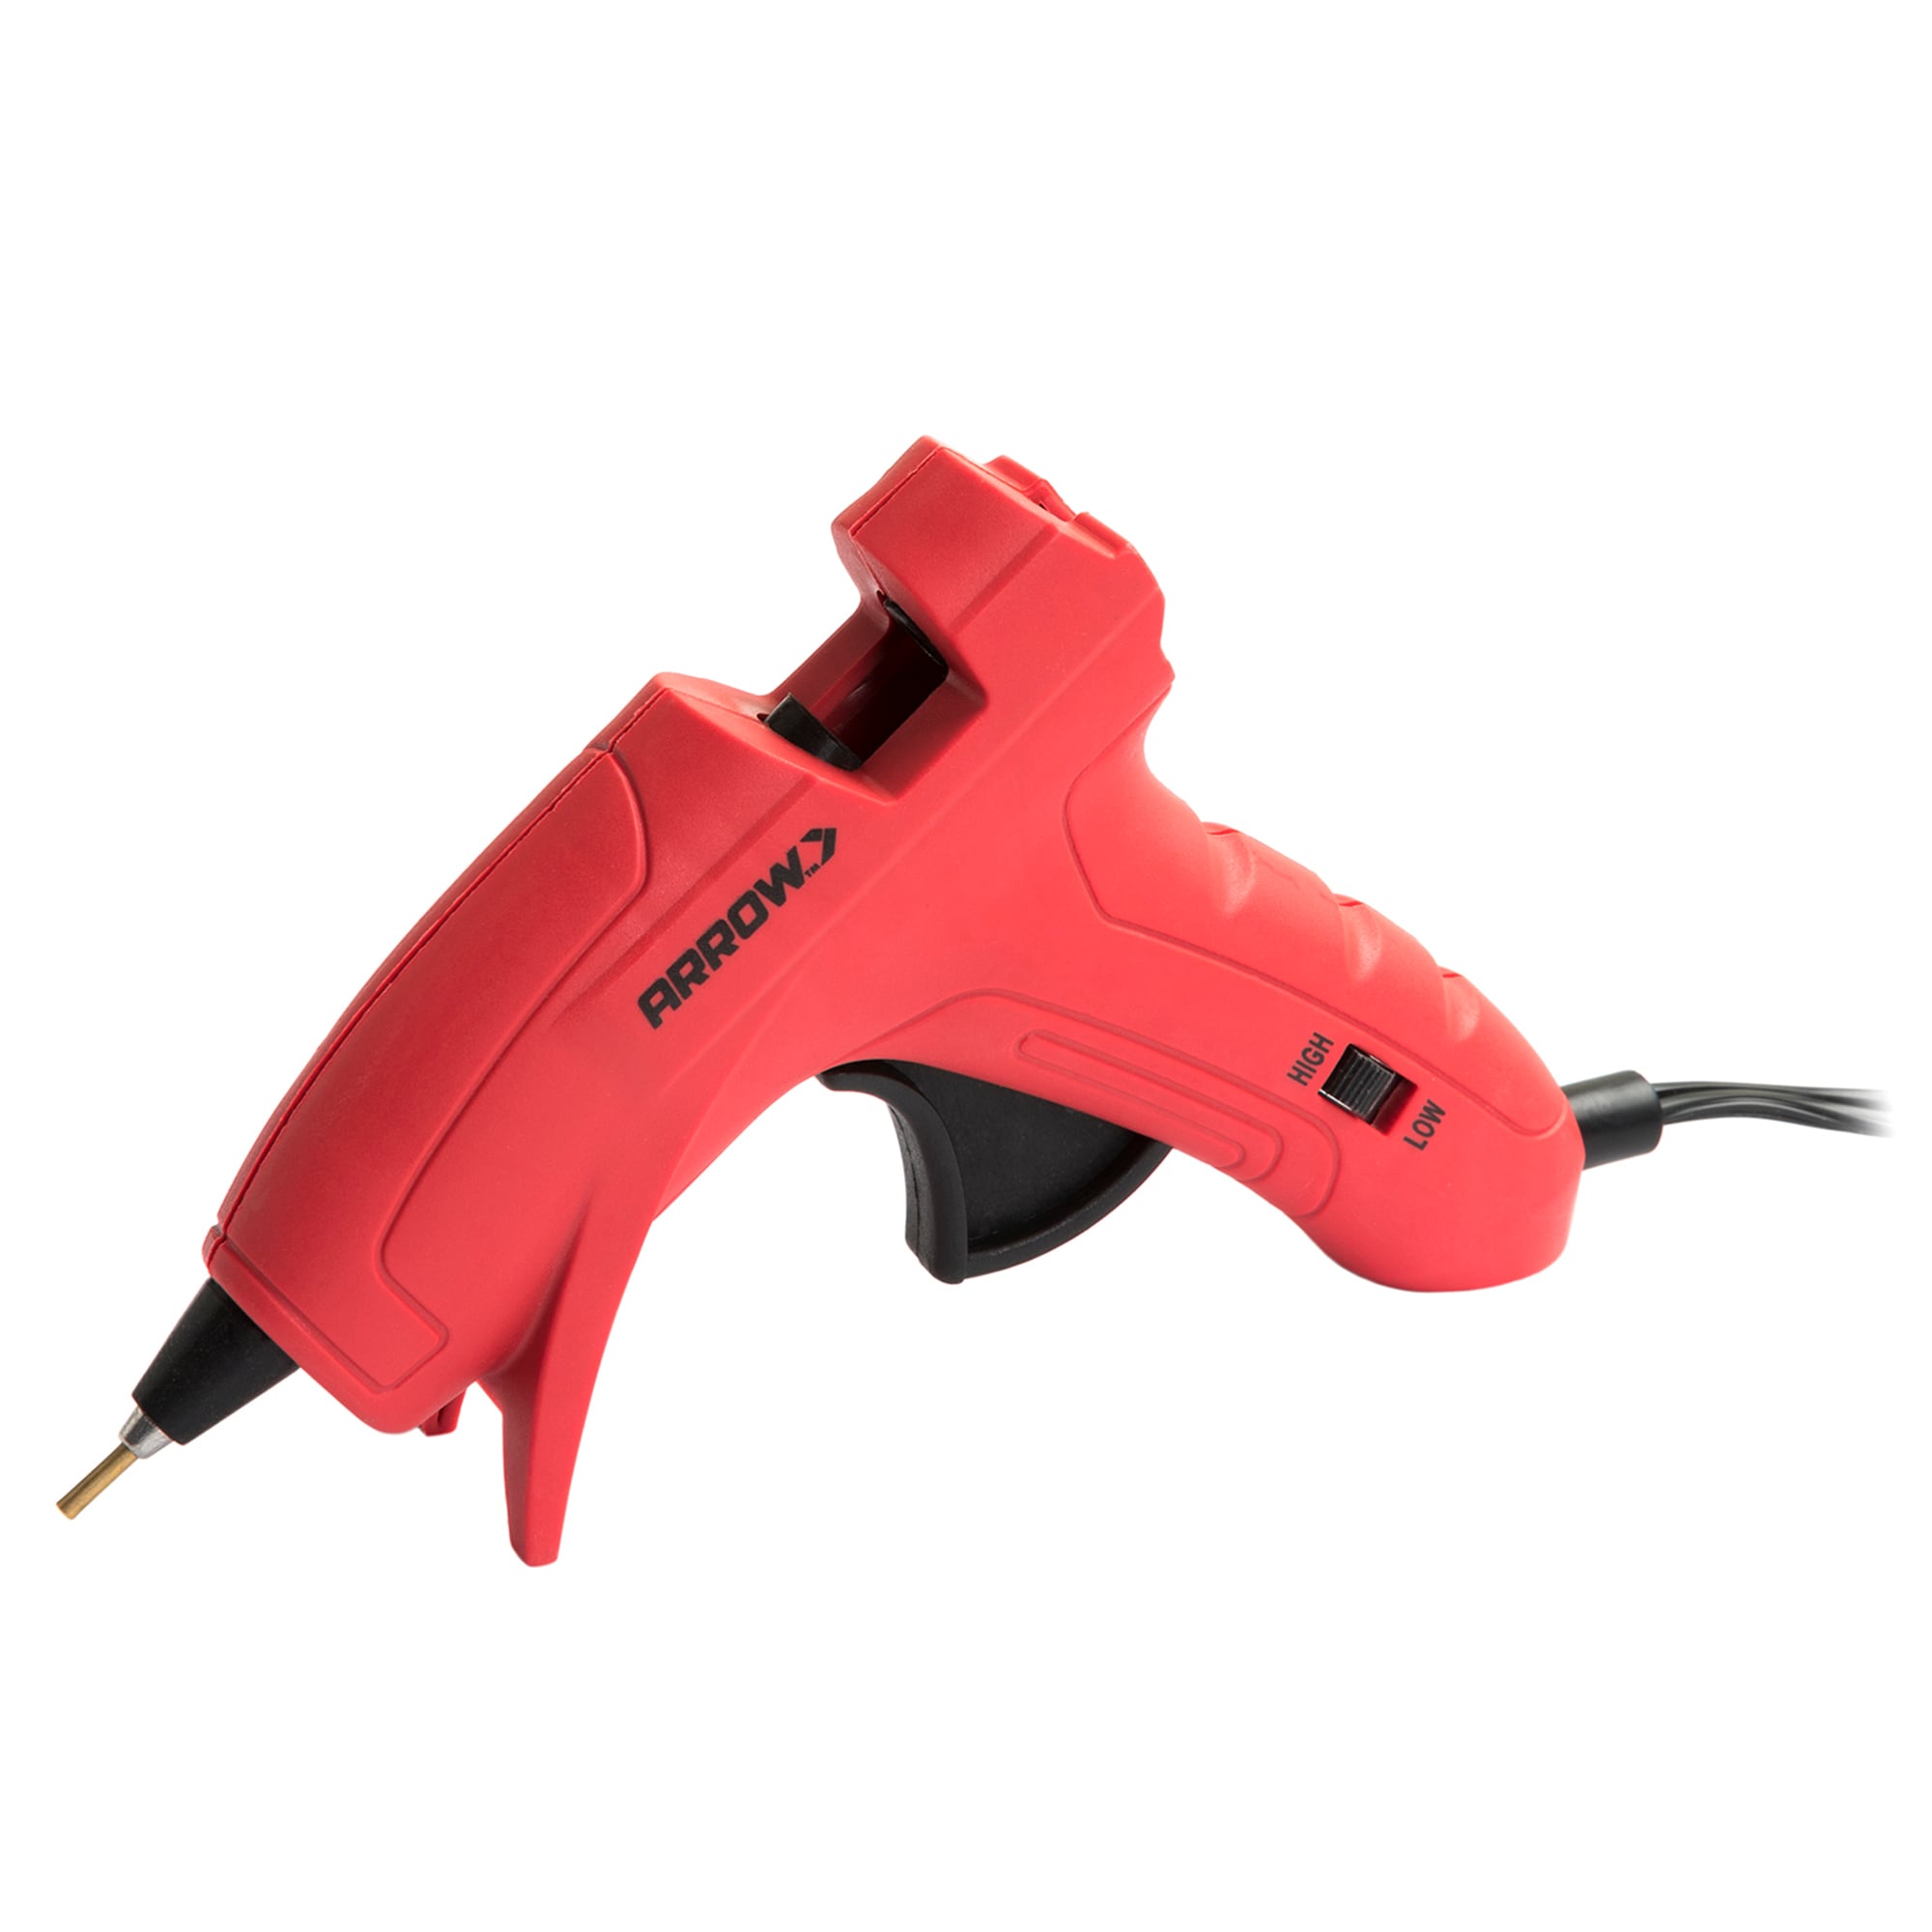 Arrow Dual Temp Glue Gun (20 Watts) - GT20DT, UL Safety Listed, Uses  0.3125-in Glue Sticks, High and Low Temp Settings